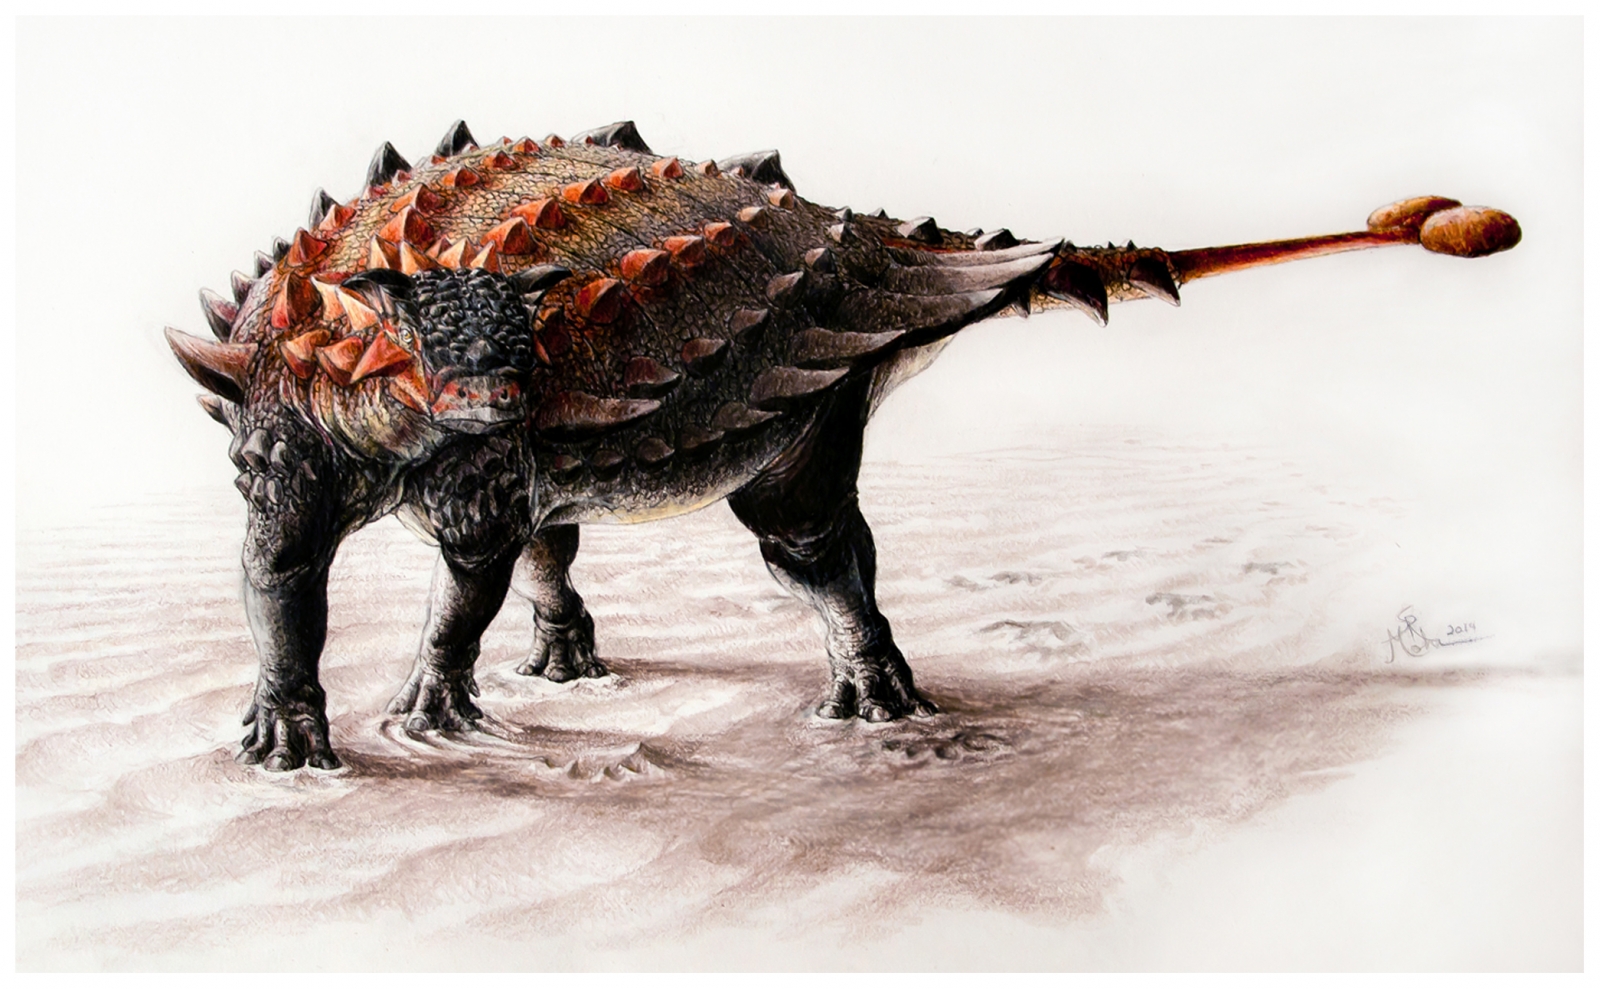 spiked-armoured-dinosaur-ziapelta-discovered-in-new-mexico-has